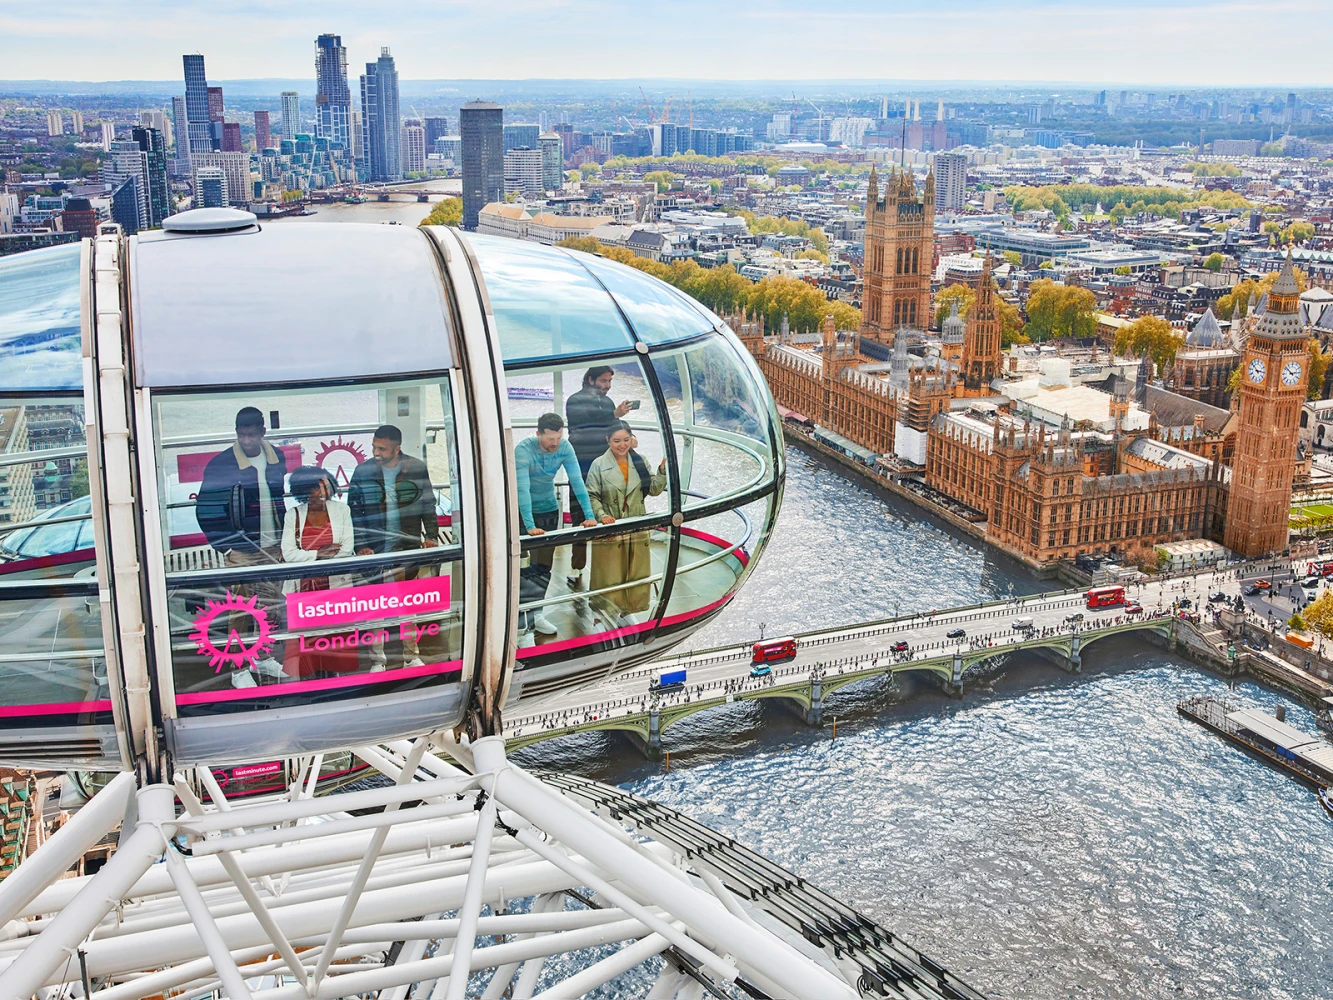 The lastminute.com London Eye Fast Track Experience: What to expect - 1